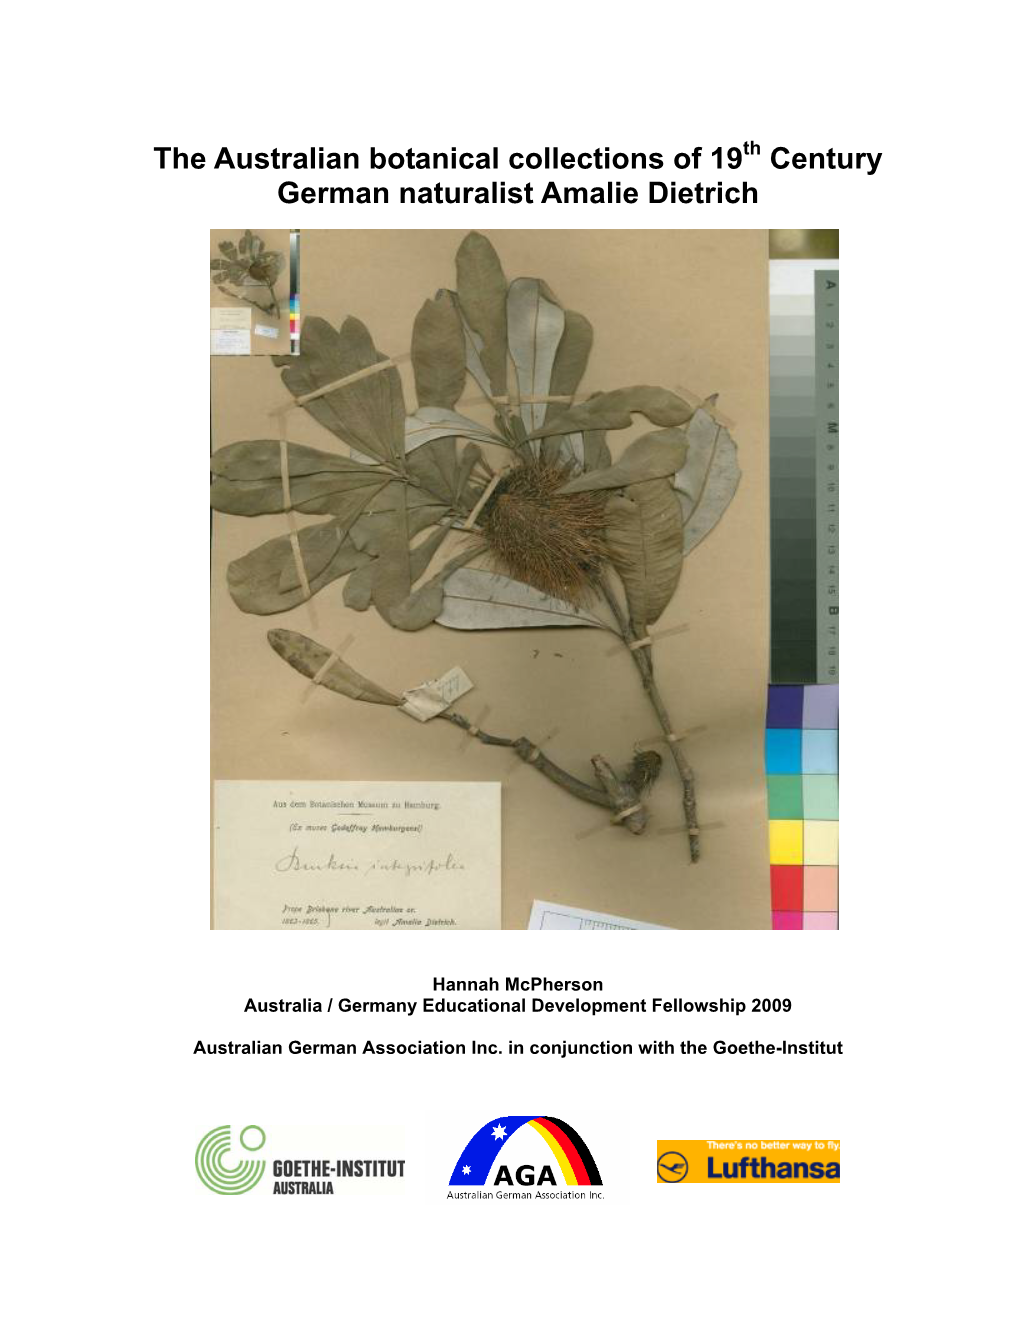 The Australian Botanical Collections of 19Th Century German Naturalist Amalie Dietrich